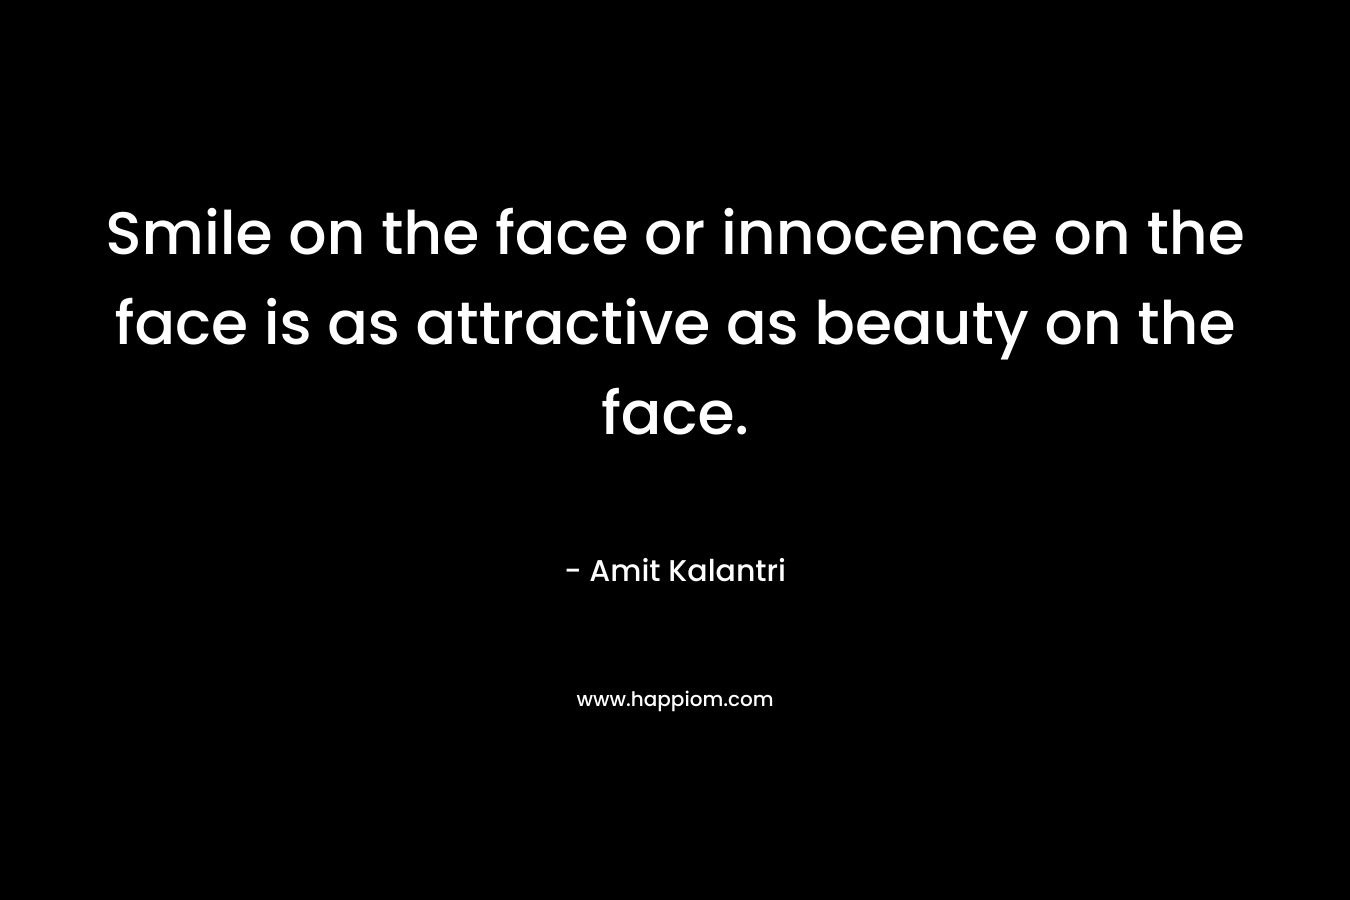 Smile on the face or innocence on the face is as attractive as beauty on the face.